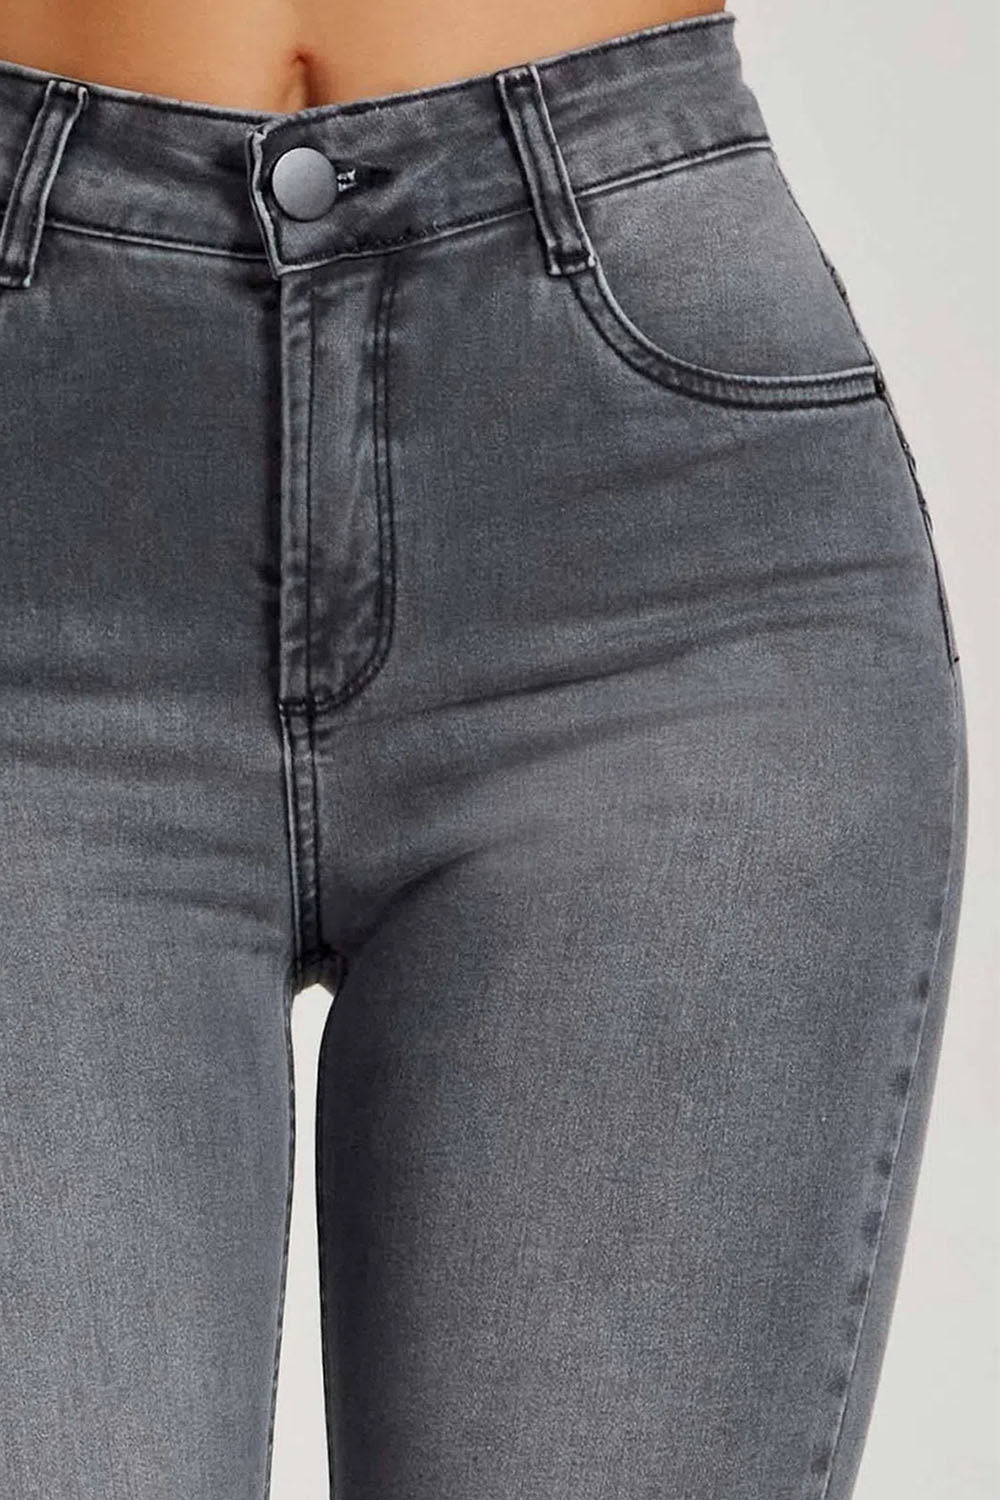 Buttoned Skinny Jeans